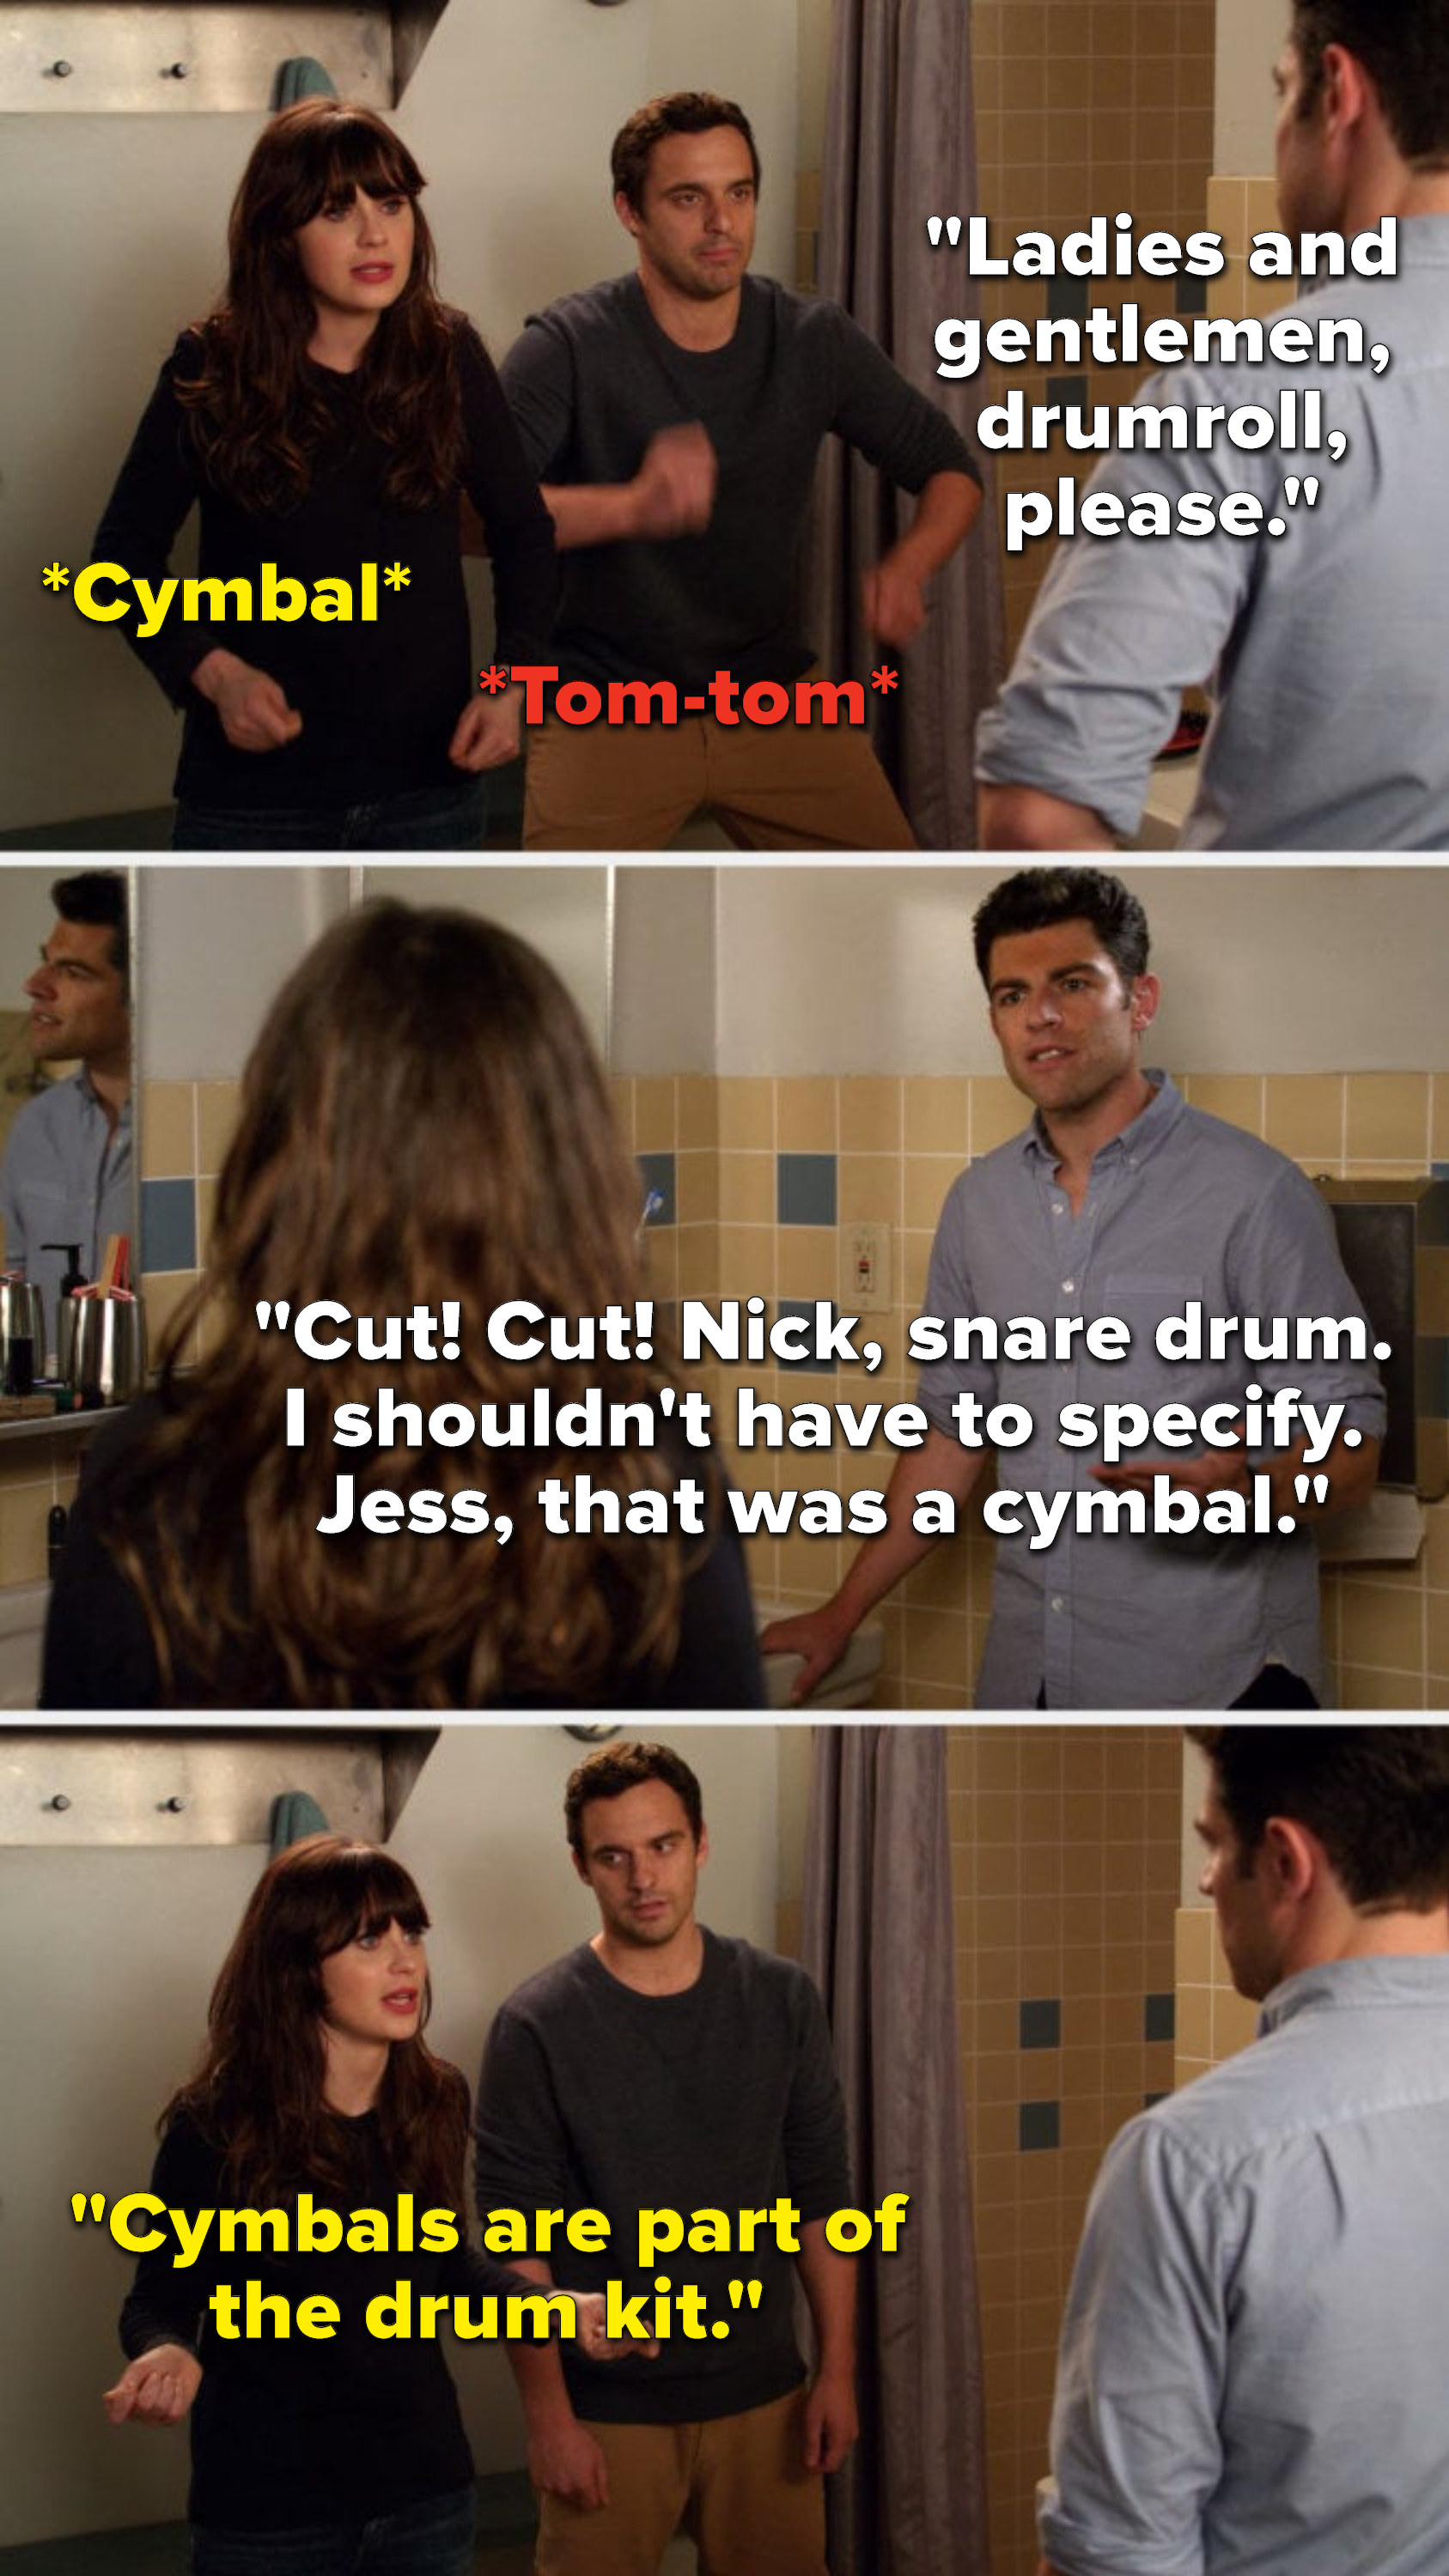 Schmidt says, Ladies and gentlemen, drumroll, please, Nick and Jess do a tom-tom and a cymbal, Schmidt says, Cut, cut, Nick, snare drum, I shouldn&#x27;t have to specify, Jess, that was a cymbal, and Jess says, Cymbals are part of the drum kit